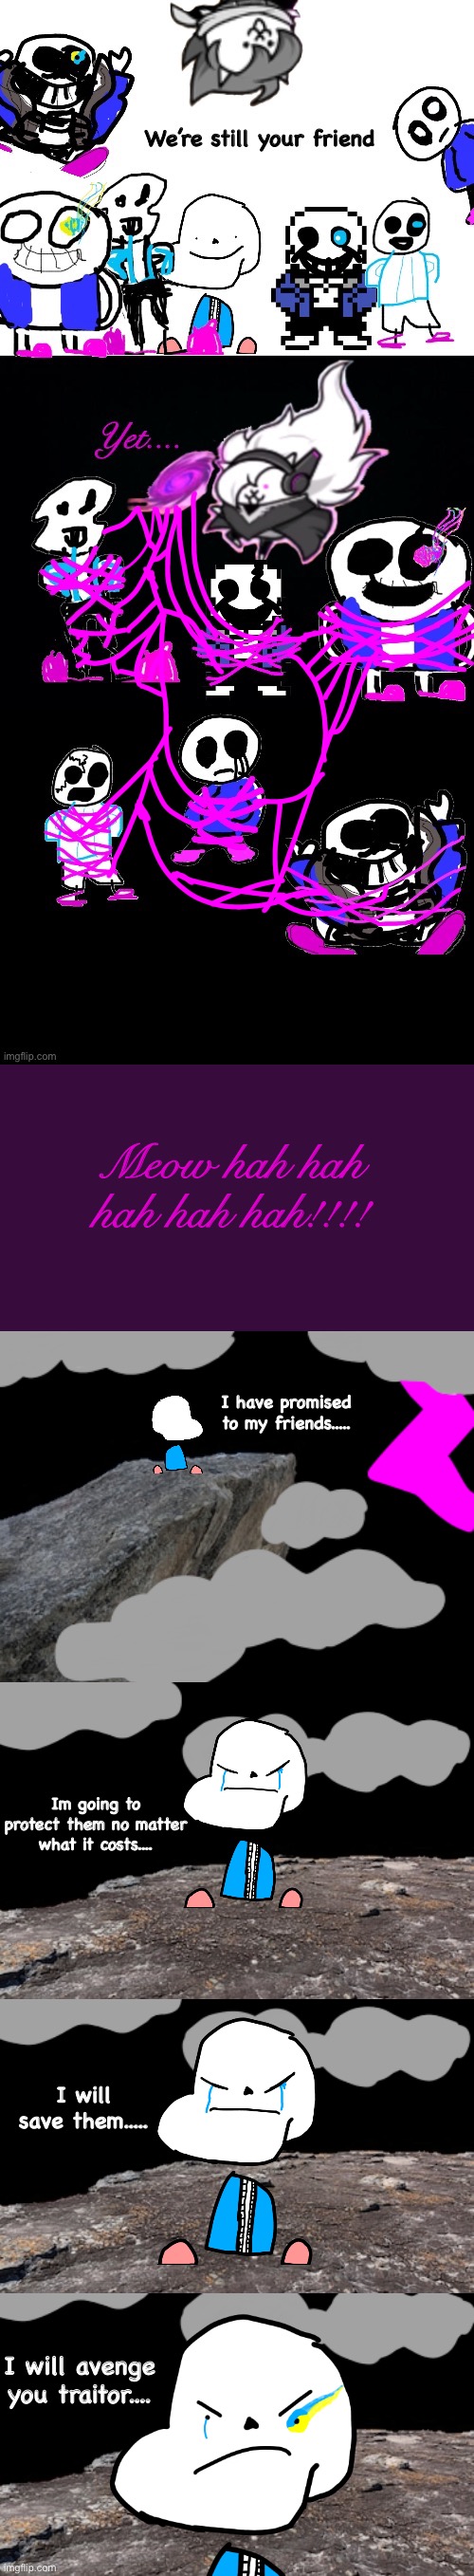 PUNny Sans/Saens: The Unfaithful Ending | Meow hah hah hah hah hah!!!! I have promised to my friends..... Im going to protect them no matter what it costs.... I will save them..... I will avenge you traitor.... | image tagged in memes,funny,sans,undertale,drawings,story | made w/ Imgflip meme maker